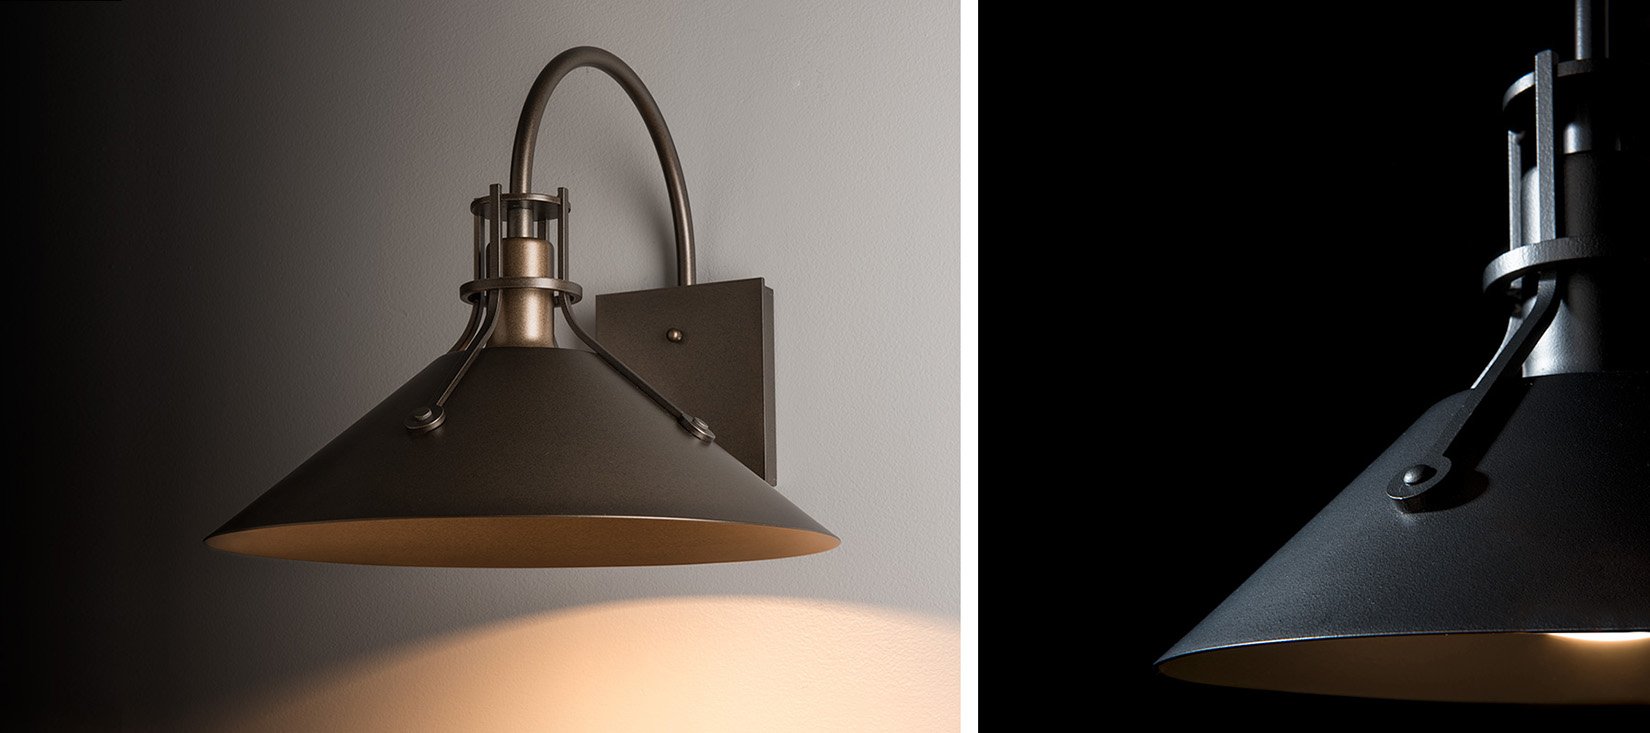 Henry Outdoor Sconce that is Dark Sky friendly